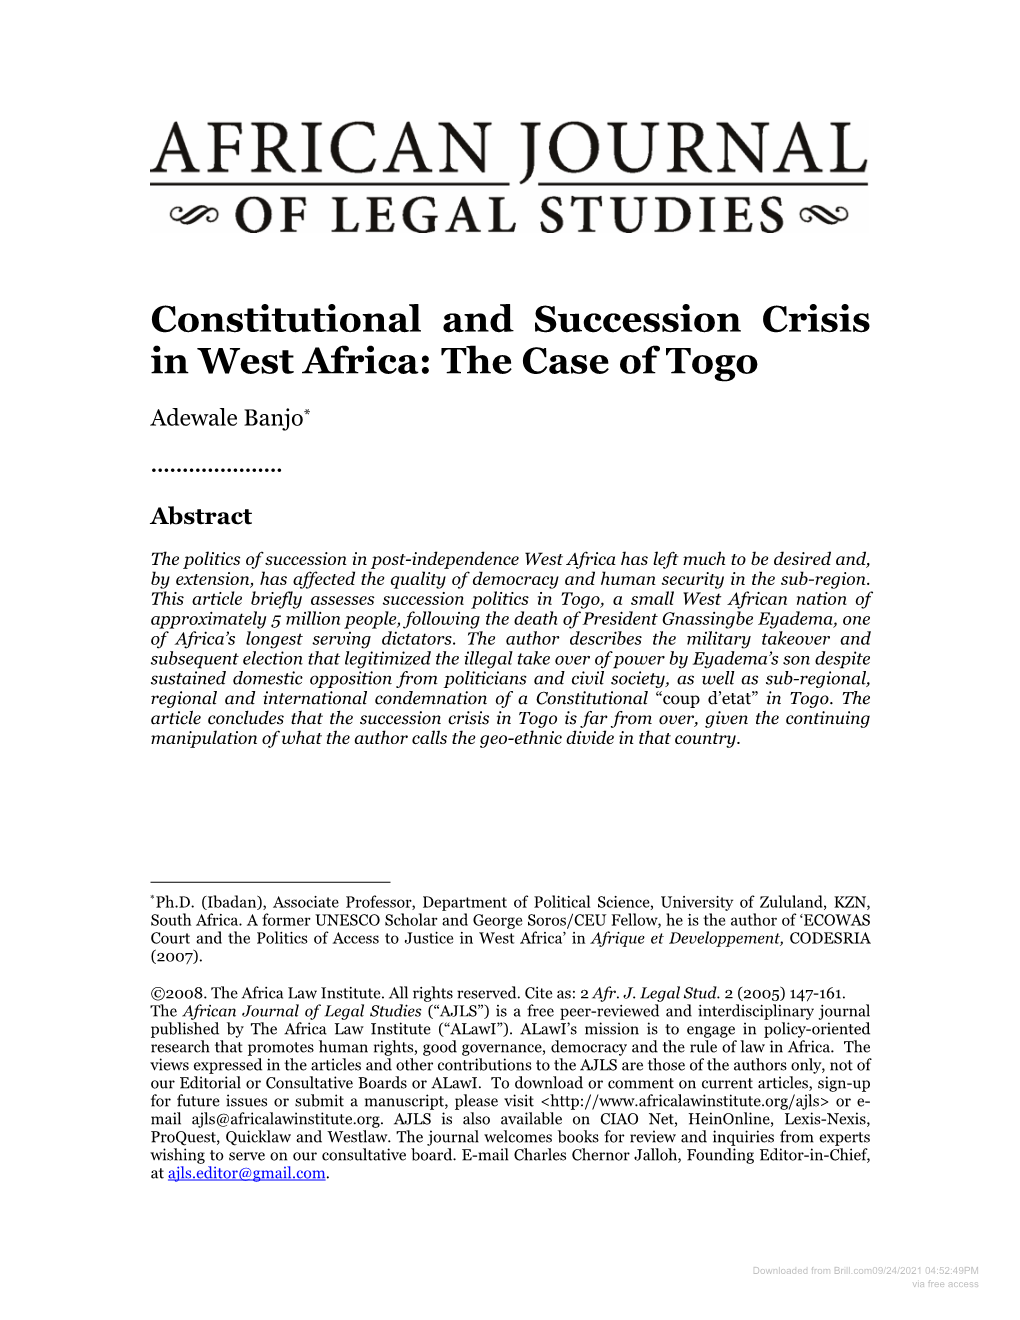 Constitutional and Succession Crisis in West Africa: the Case of Togo